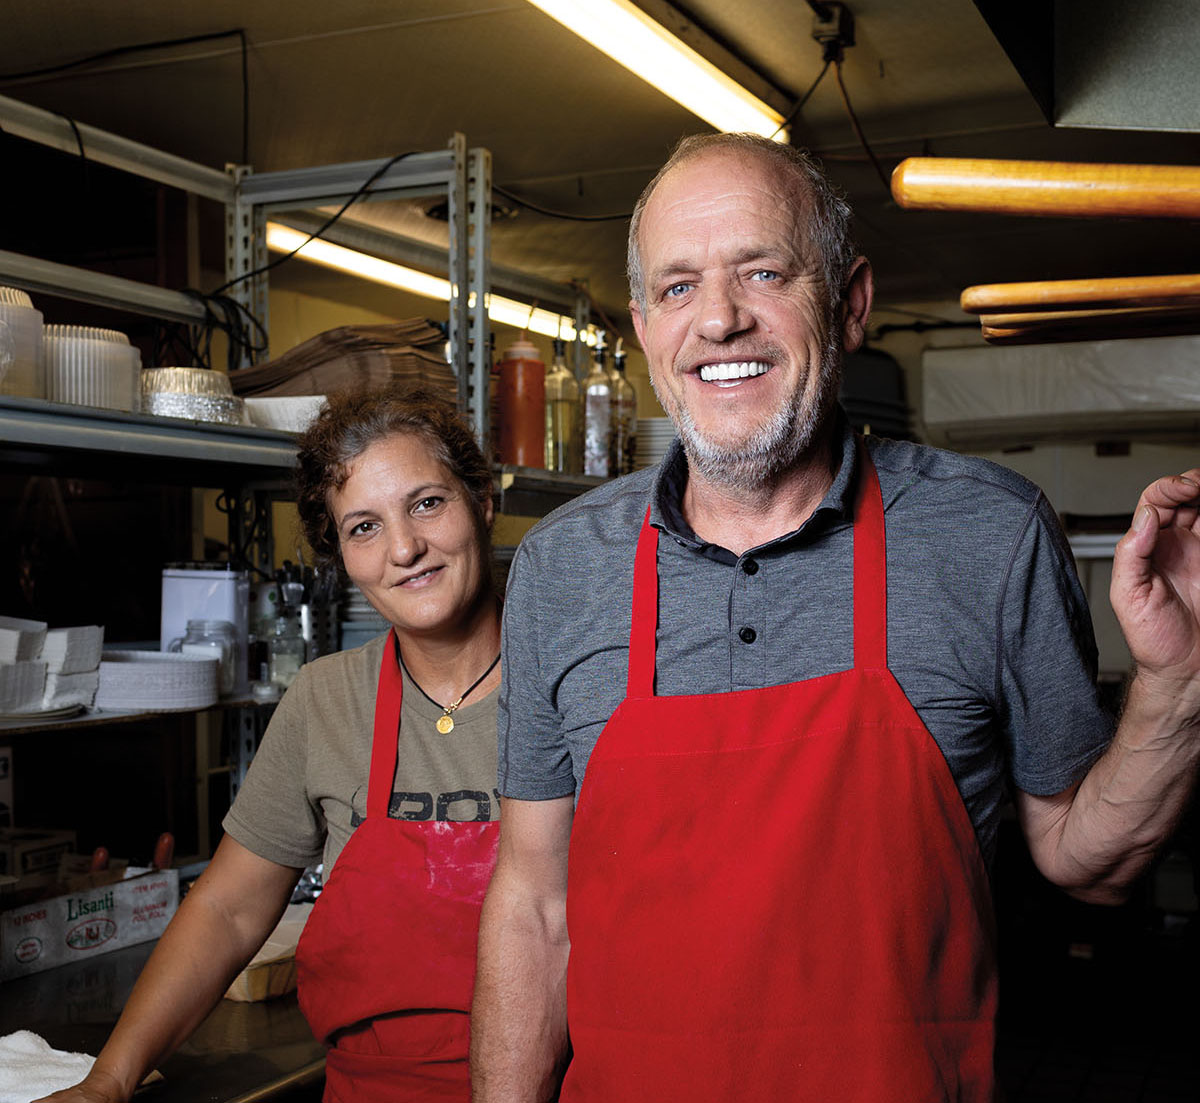 Two people in red aprons smile in a kitchen setting with fluorescent lights